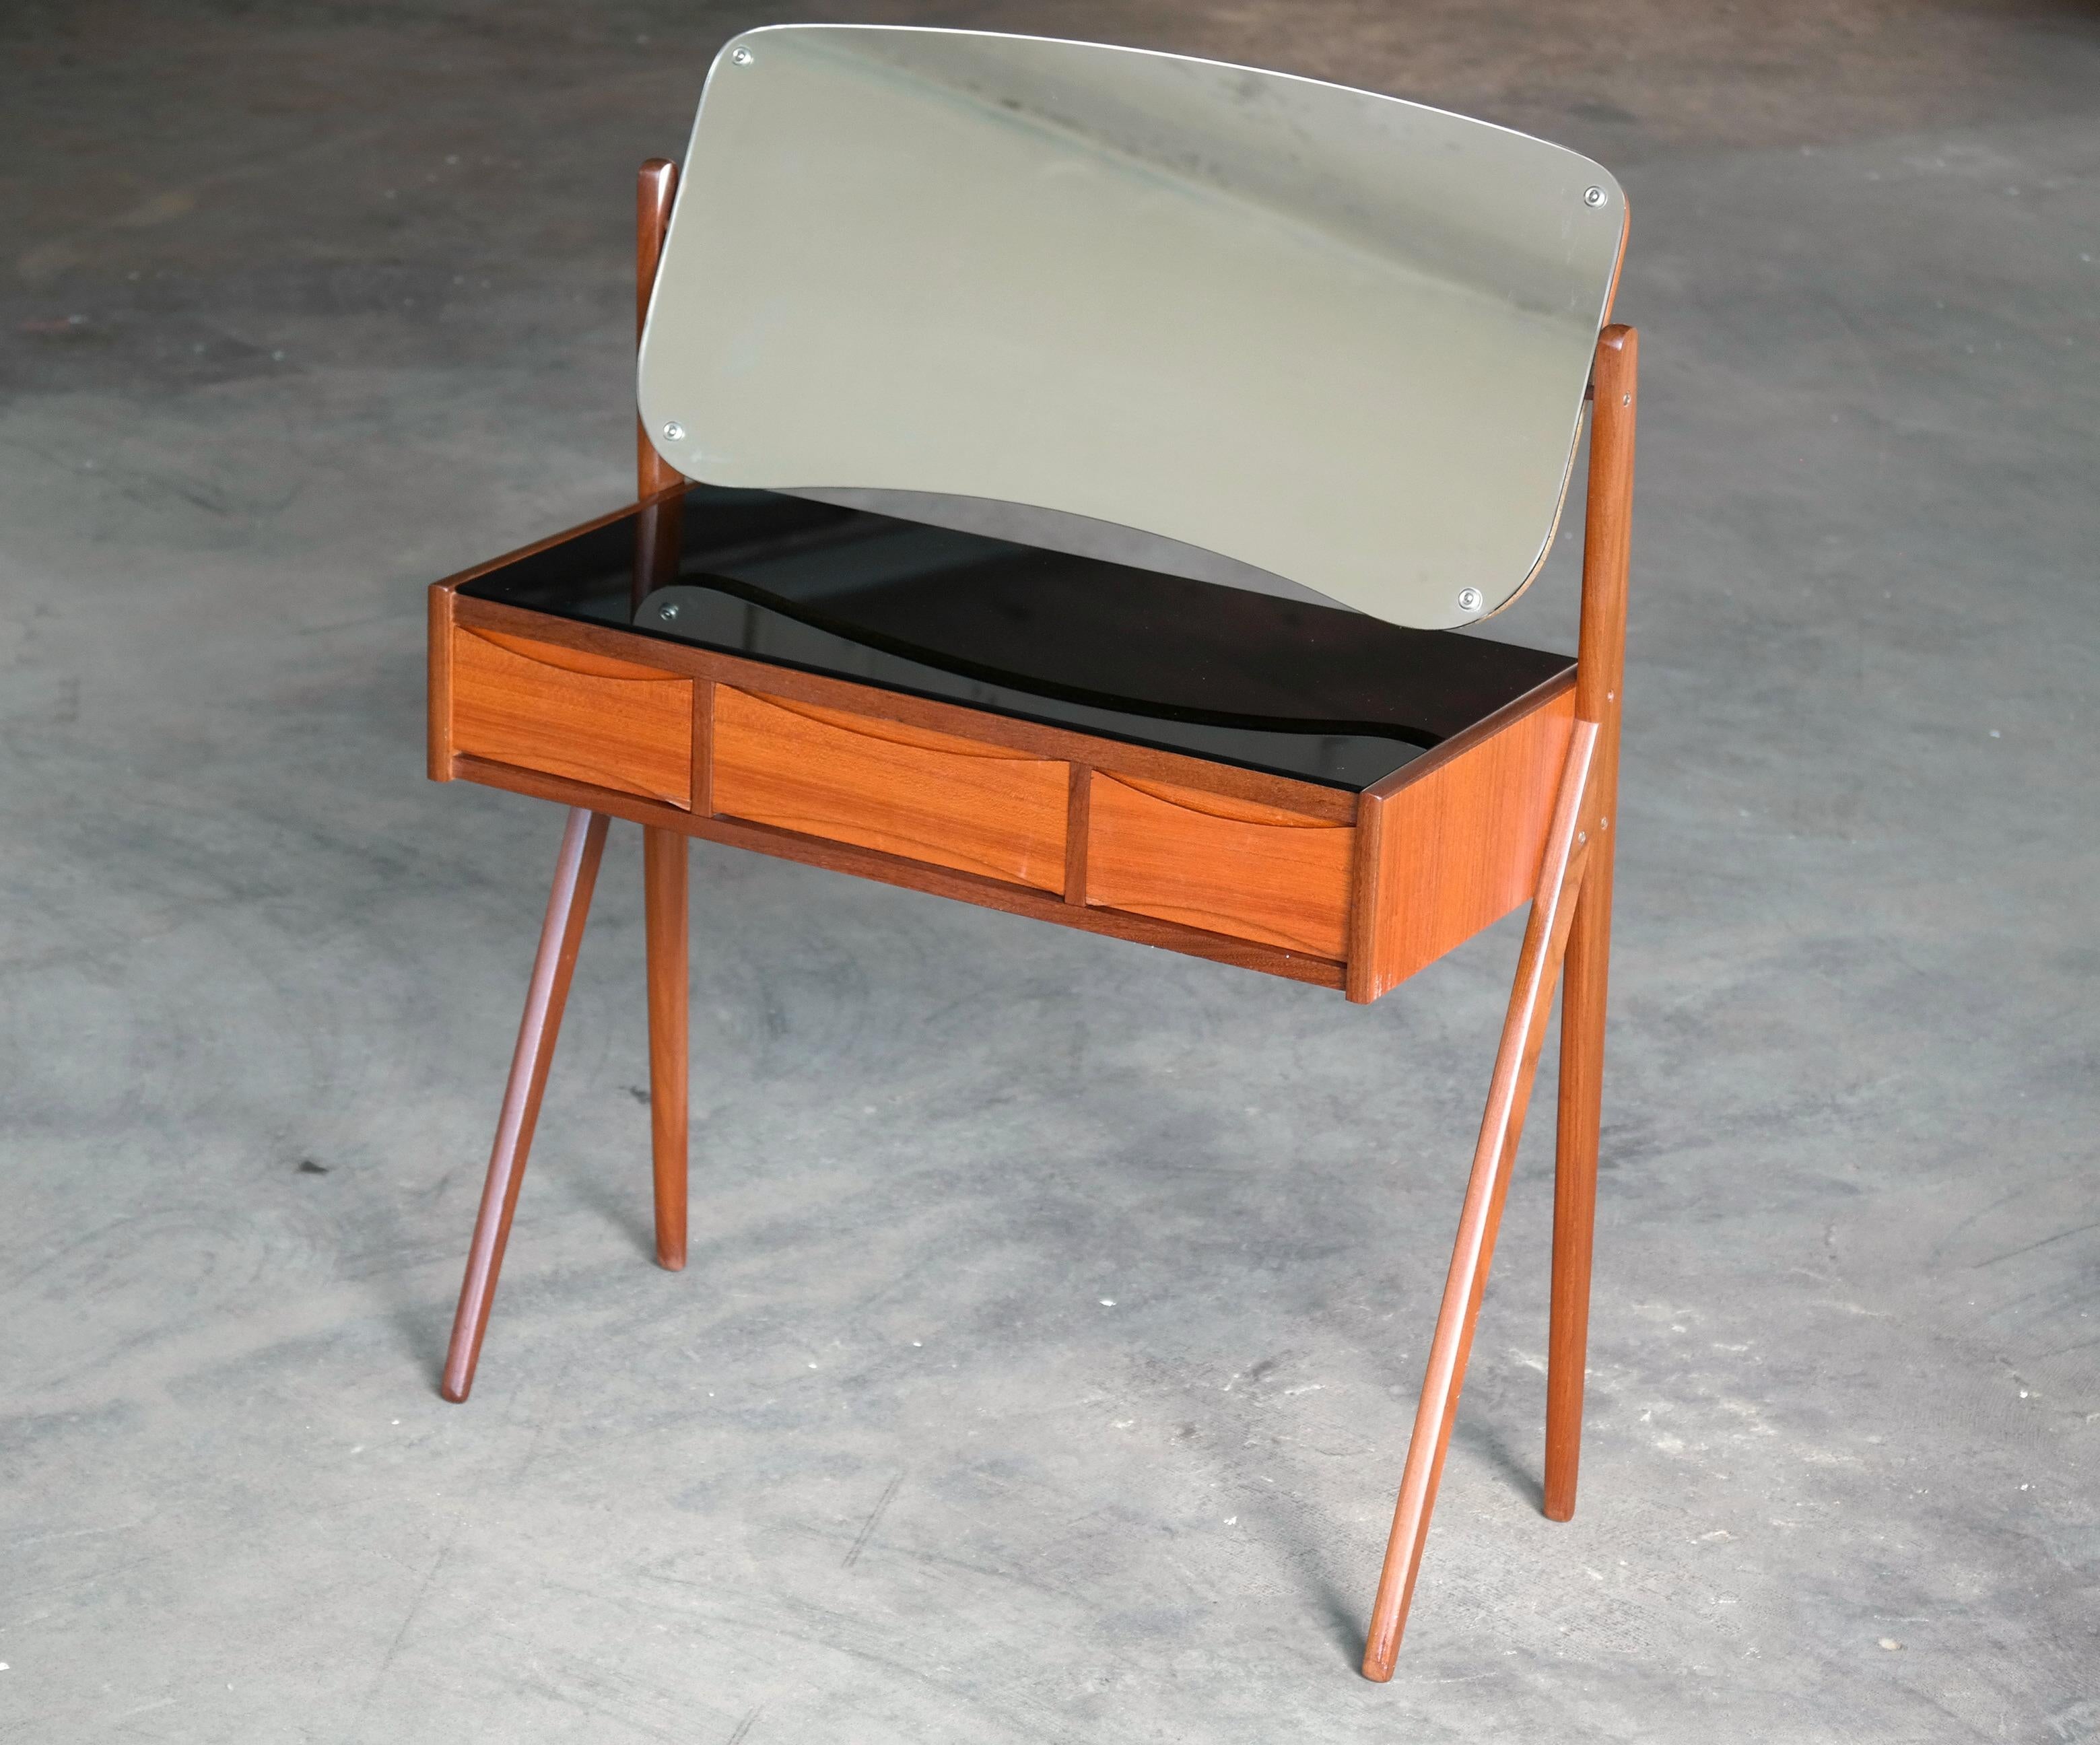 Very elegant vanity or small dressing table designed by Arne Vodder in Denmark in the 1960s. Cabinet made from dark teak and the drawer fronts in light colored teak veneers creating a nice two-tone - topped with a black glass top over three drawers